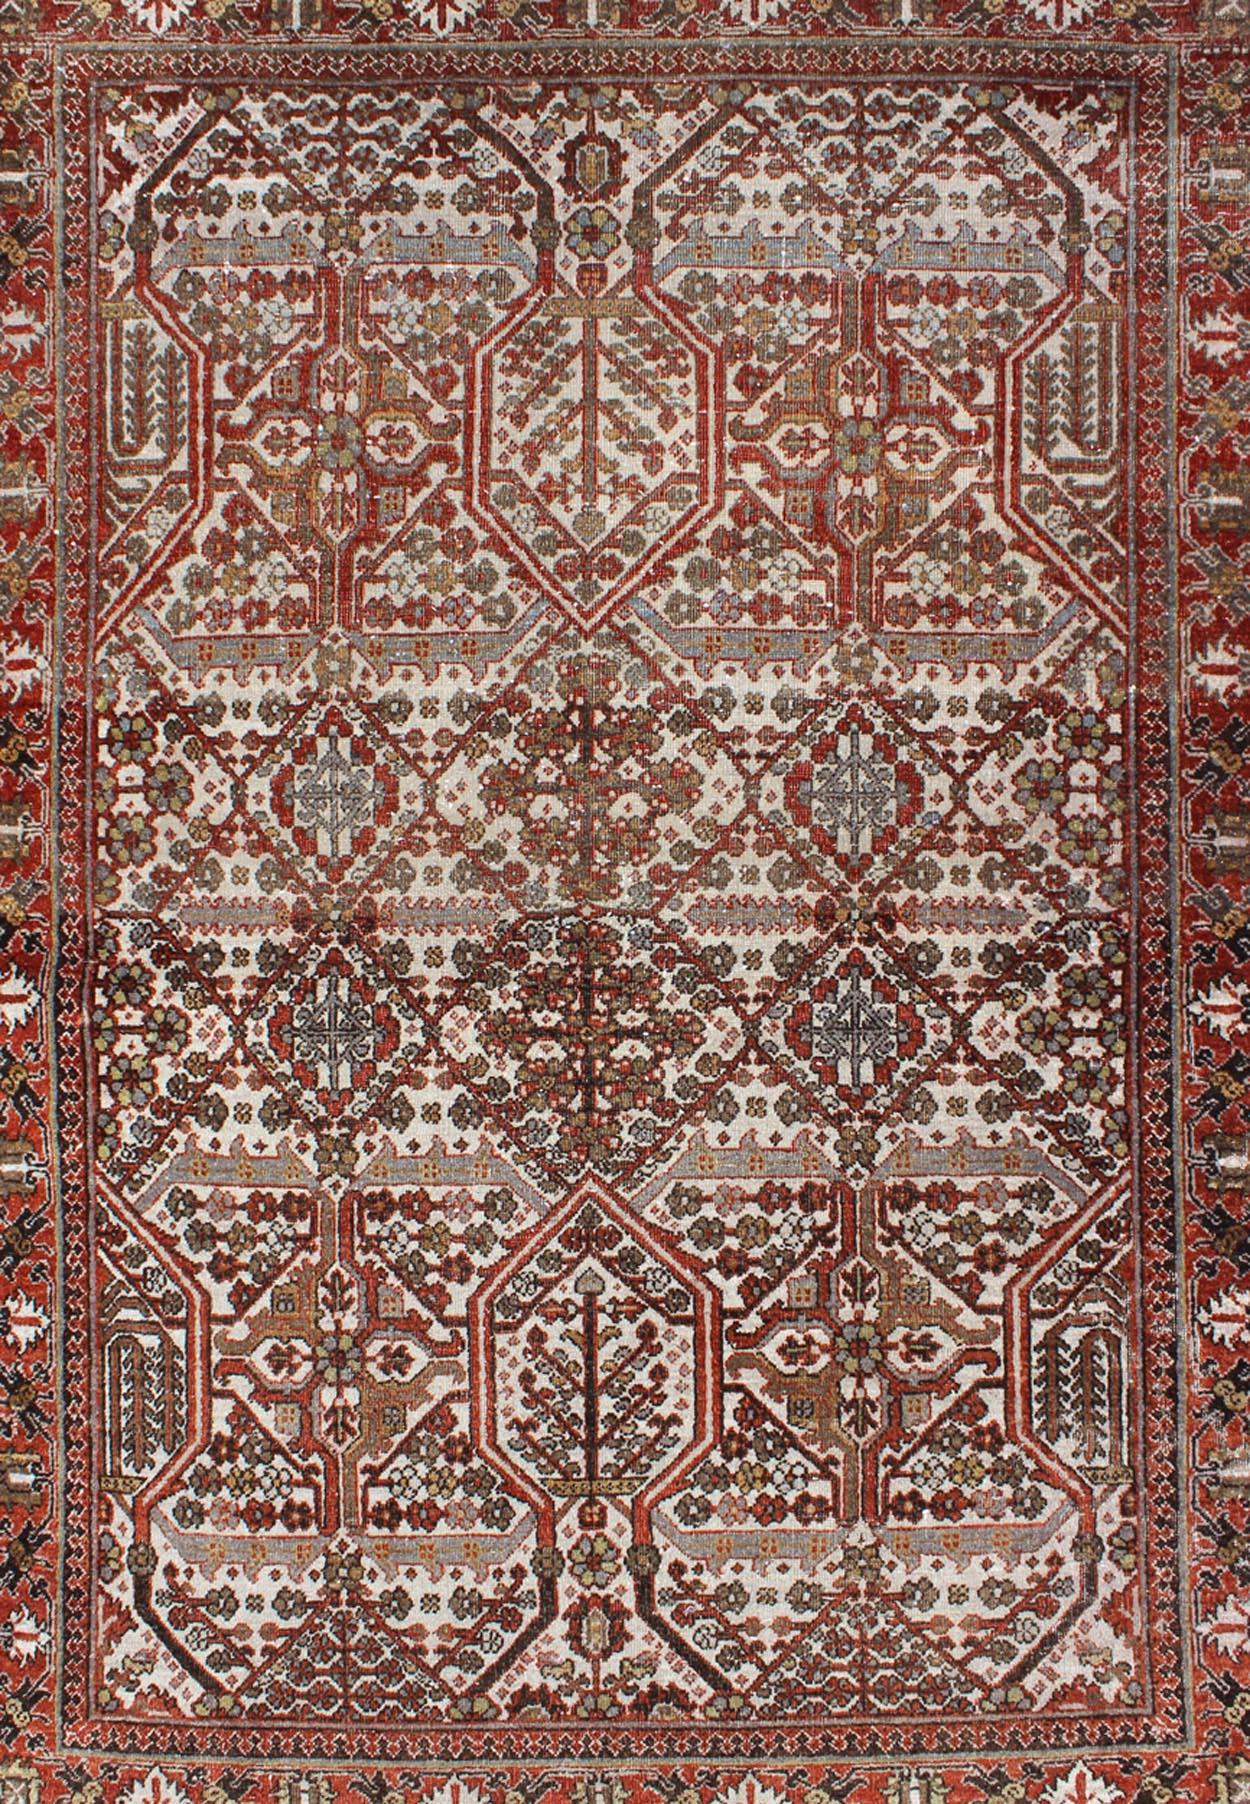 Antique Persian Joshegan Rug in Ivory Background with Red, Green and Blue 
This antique Joshegan rug from 1920s Iran was handwoven and bears a remarkably unique all-over interconnected Sub-geometric design, consisting mostly of diamond shapes and